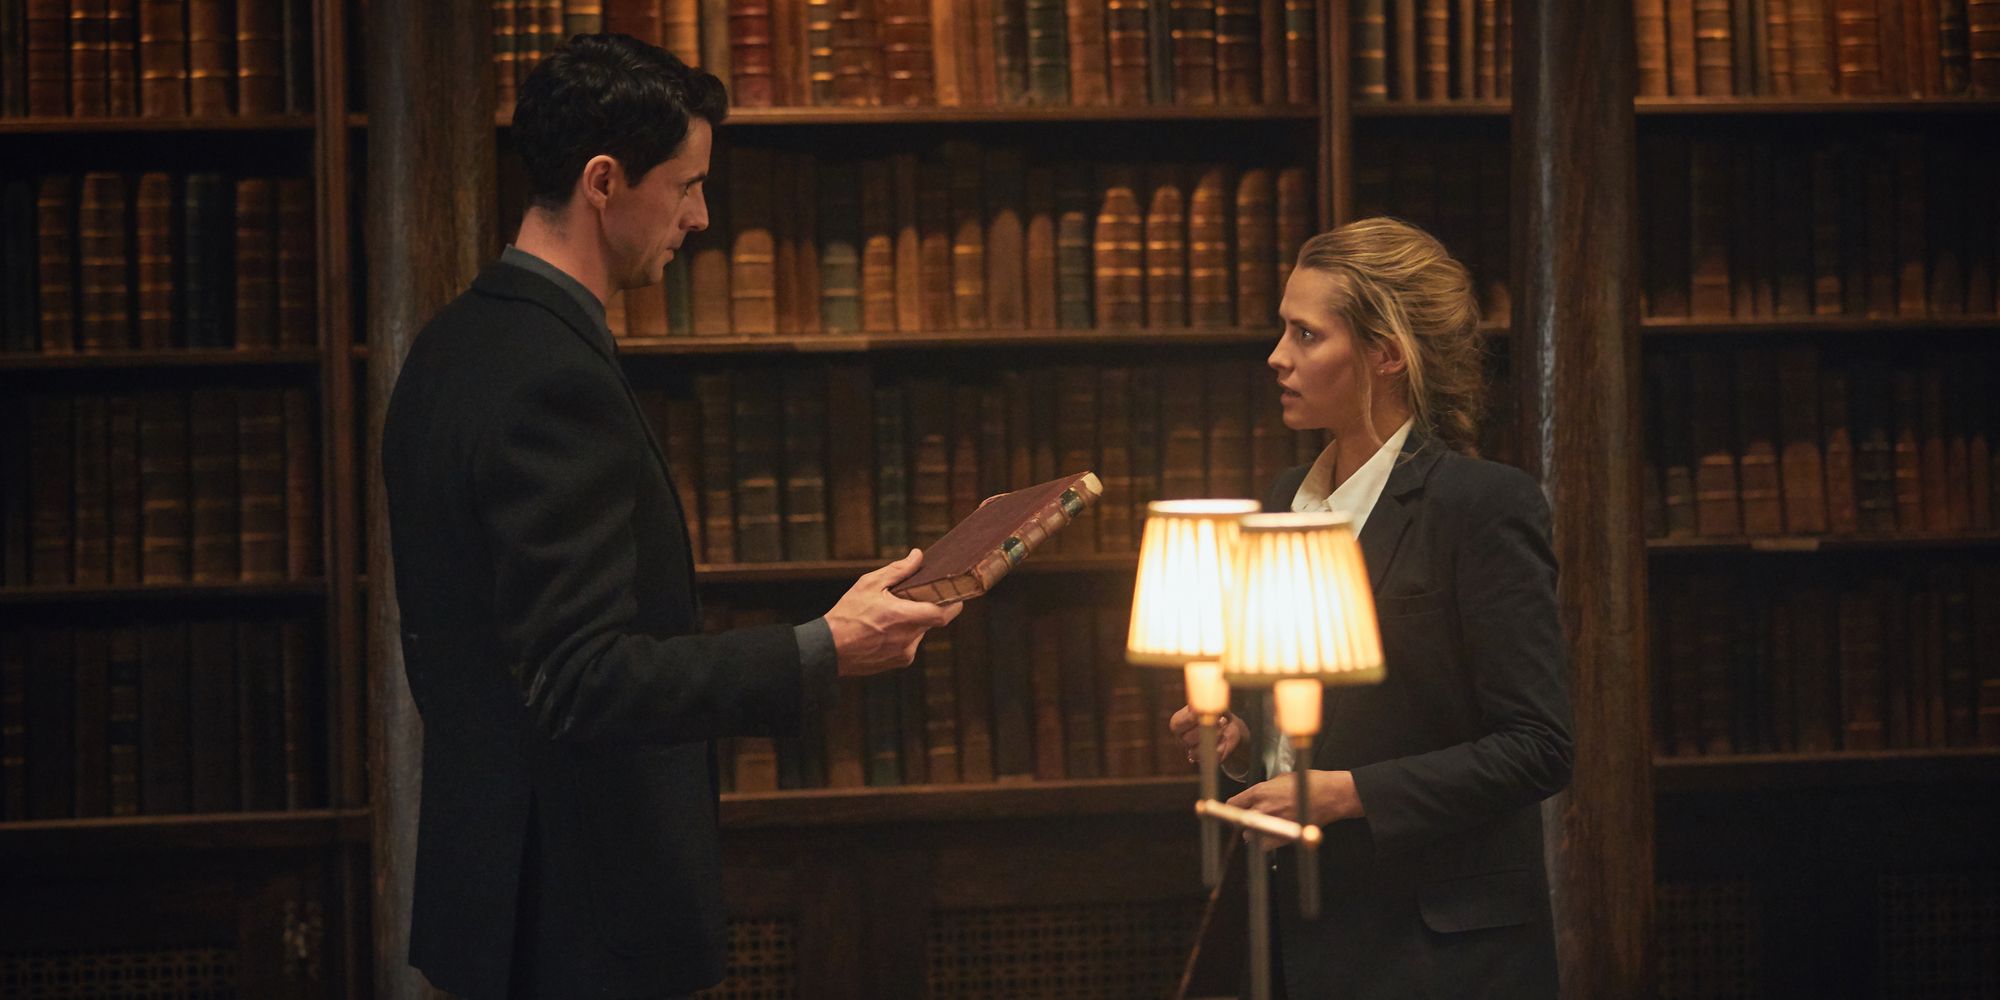 Matthew Goode and Teresa Palmer in A Discovery of Witches Season 1